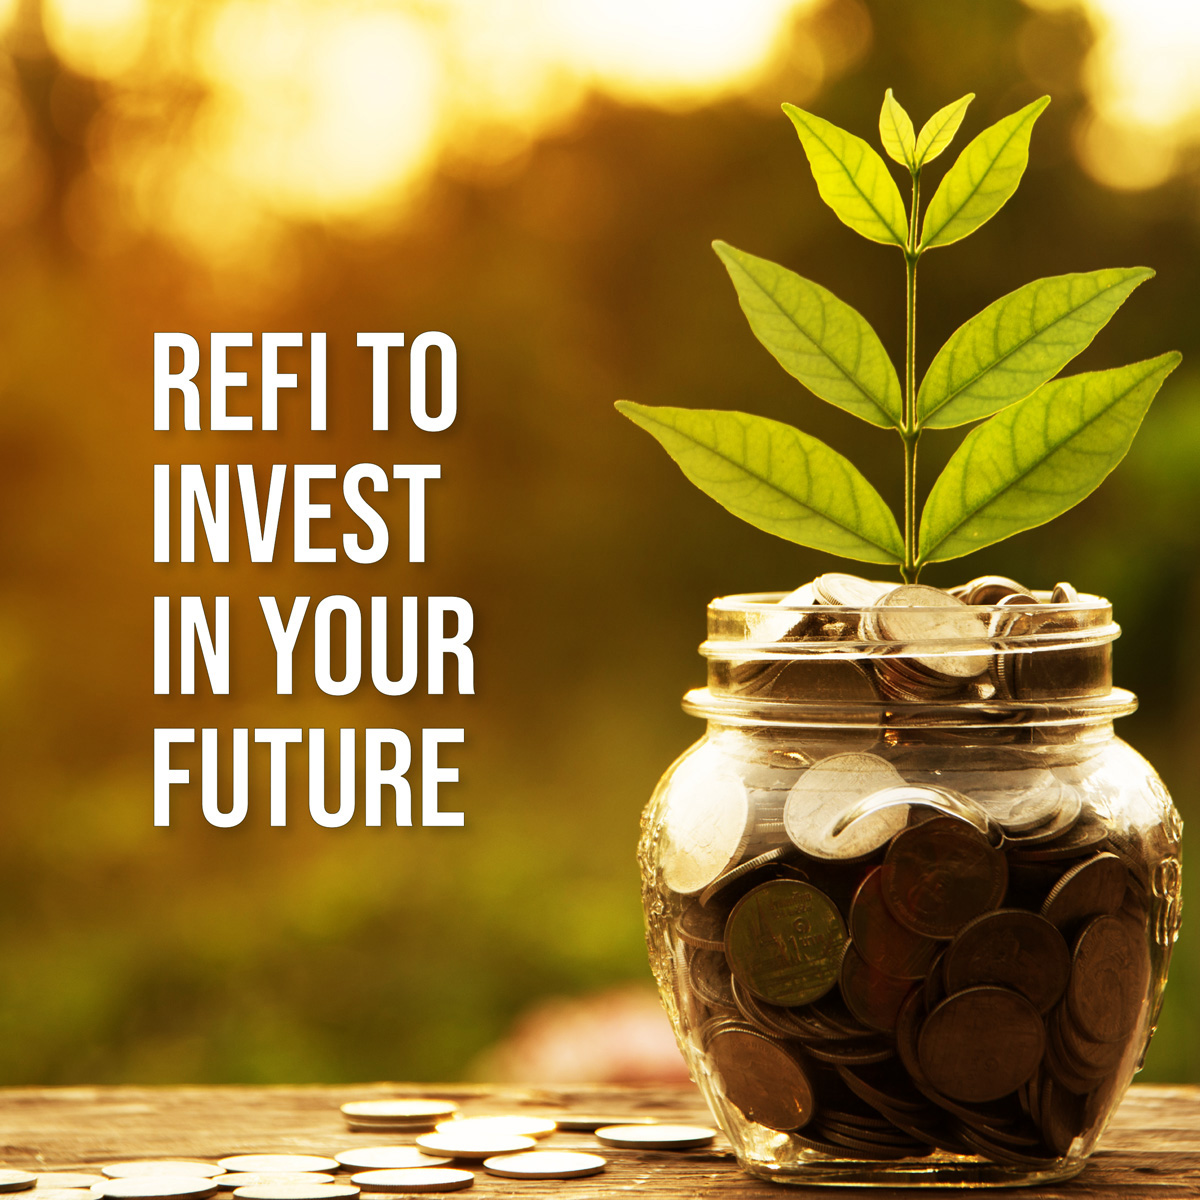 Ready to make your money work smarter, not harder? Give us a ring and let's chat about how we can help you save some cash or make that dream move a reality. Your wallet will thank you later! #financegoals #investmentopportunity #smartmoney